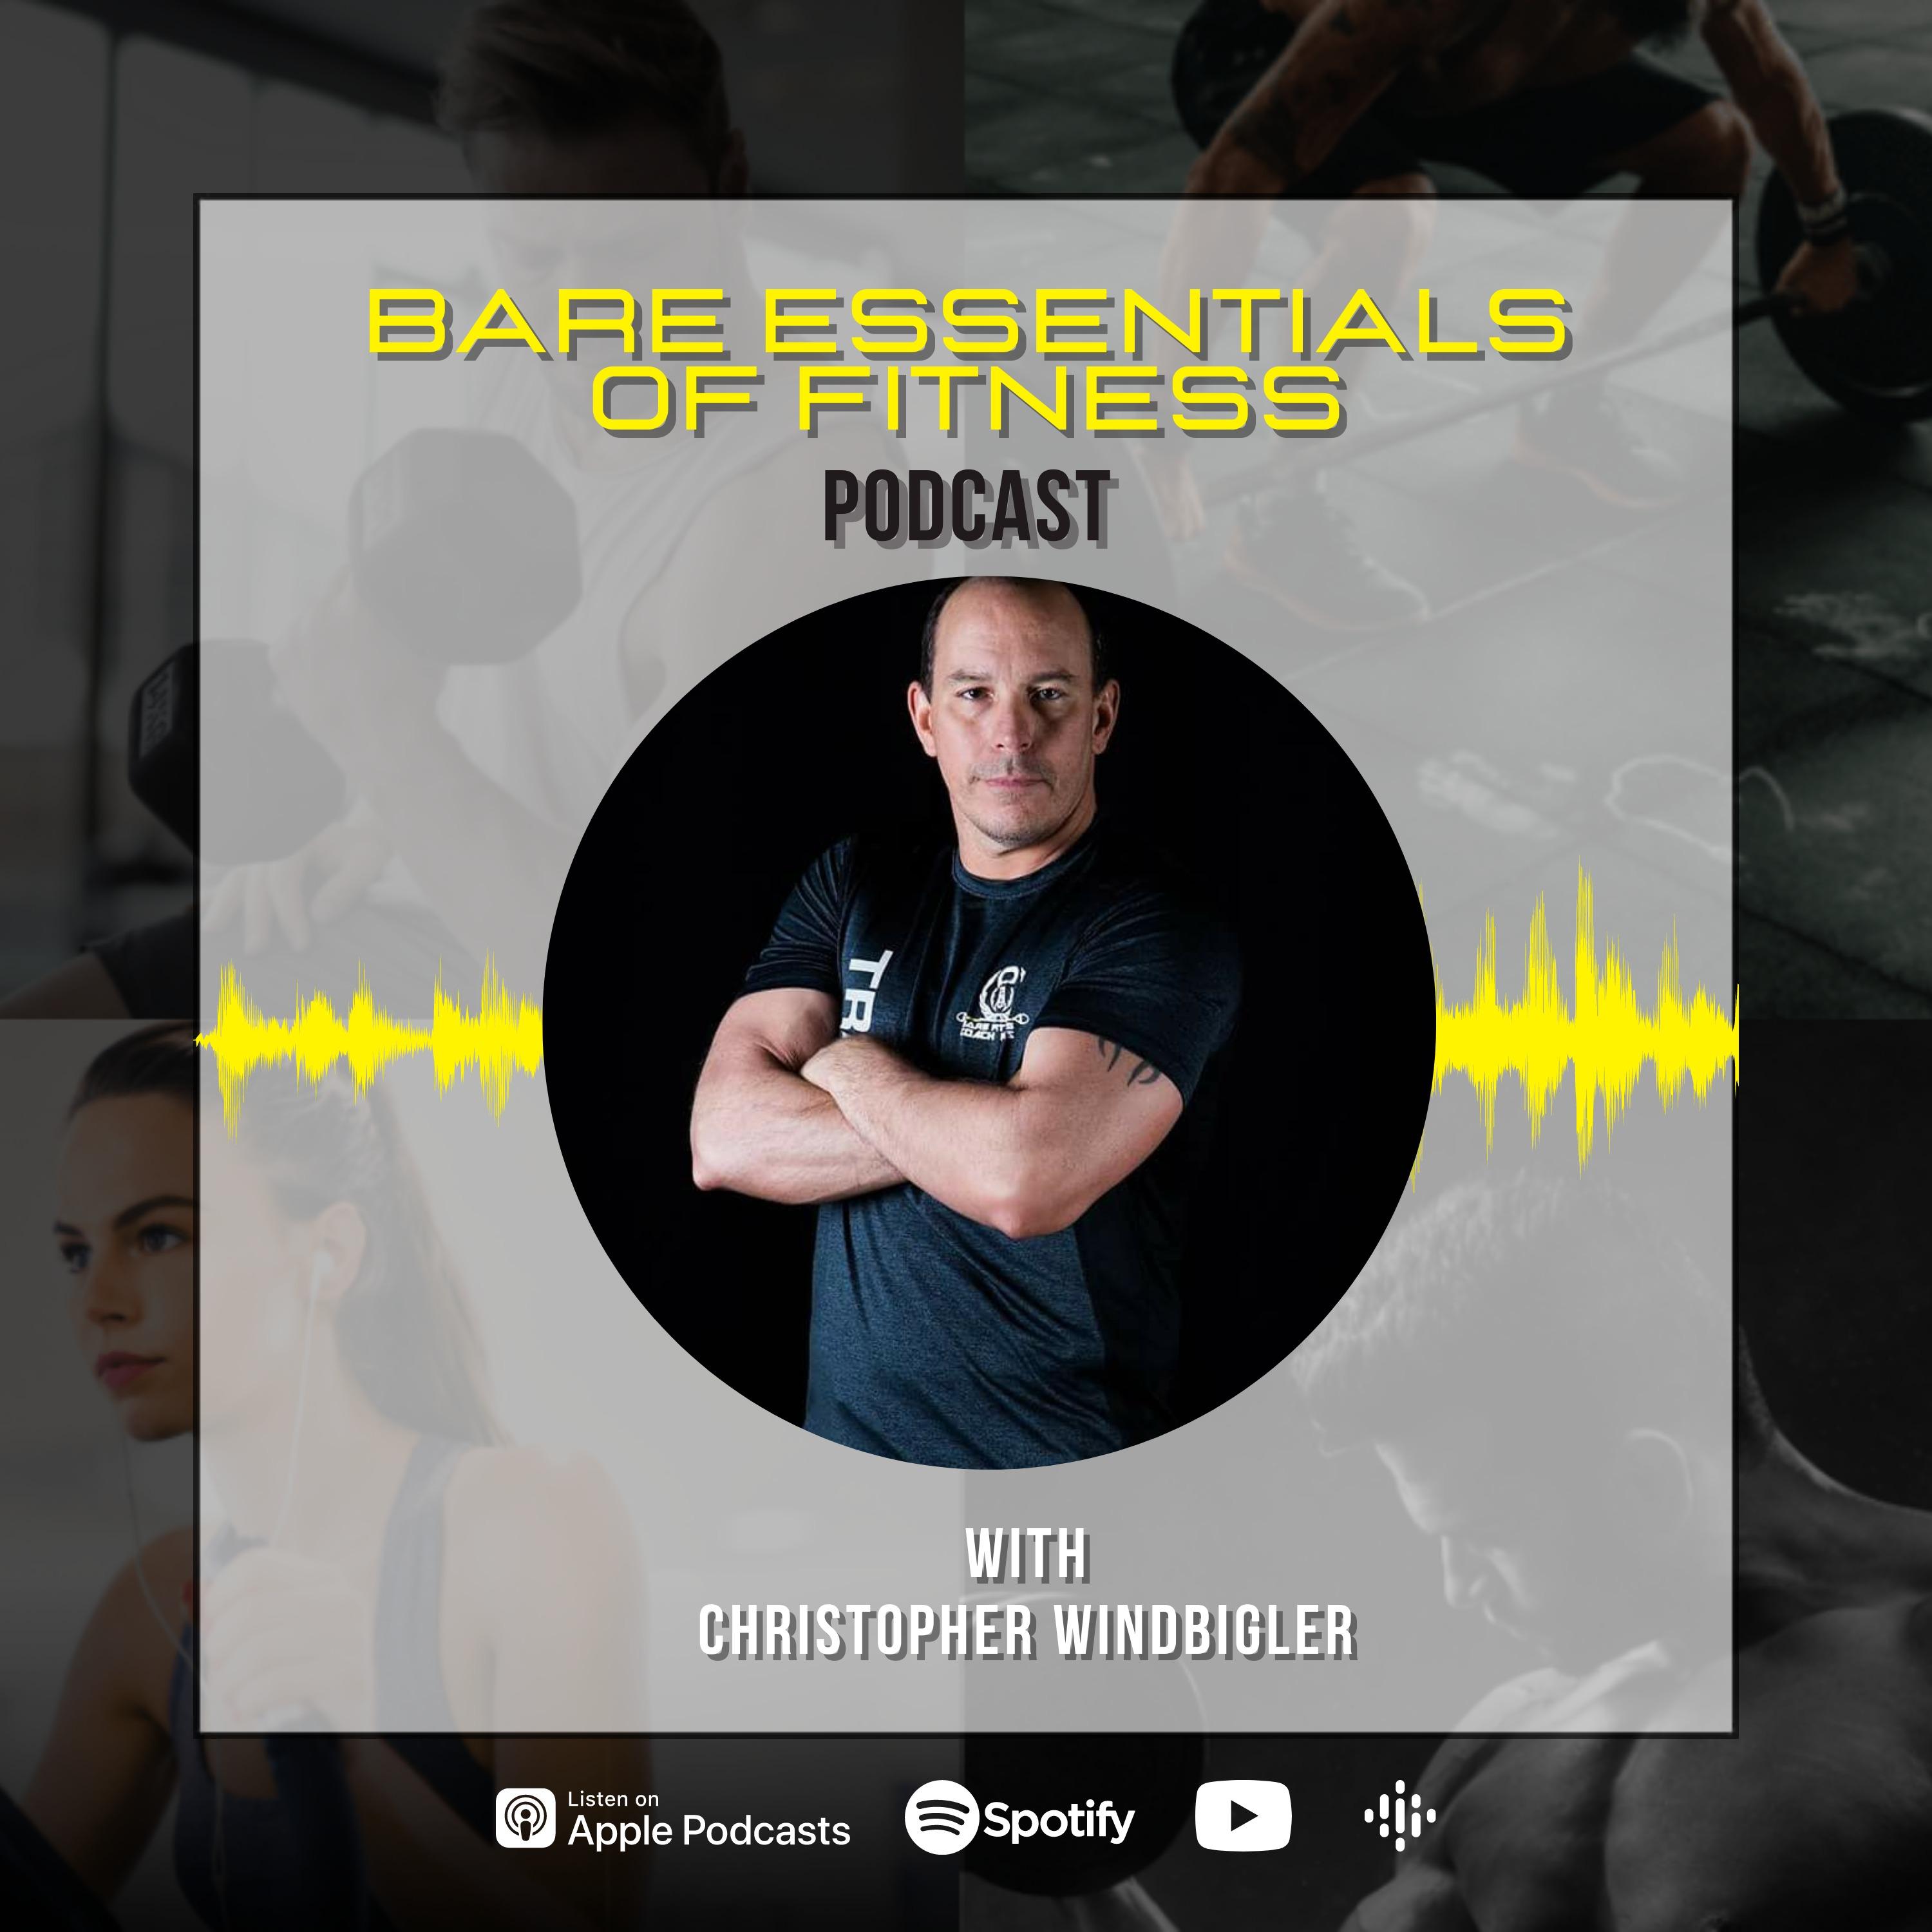 Bare Essentials of Fitness Podcast